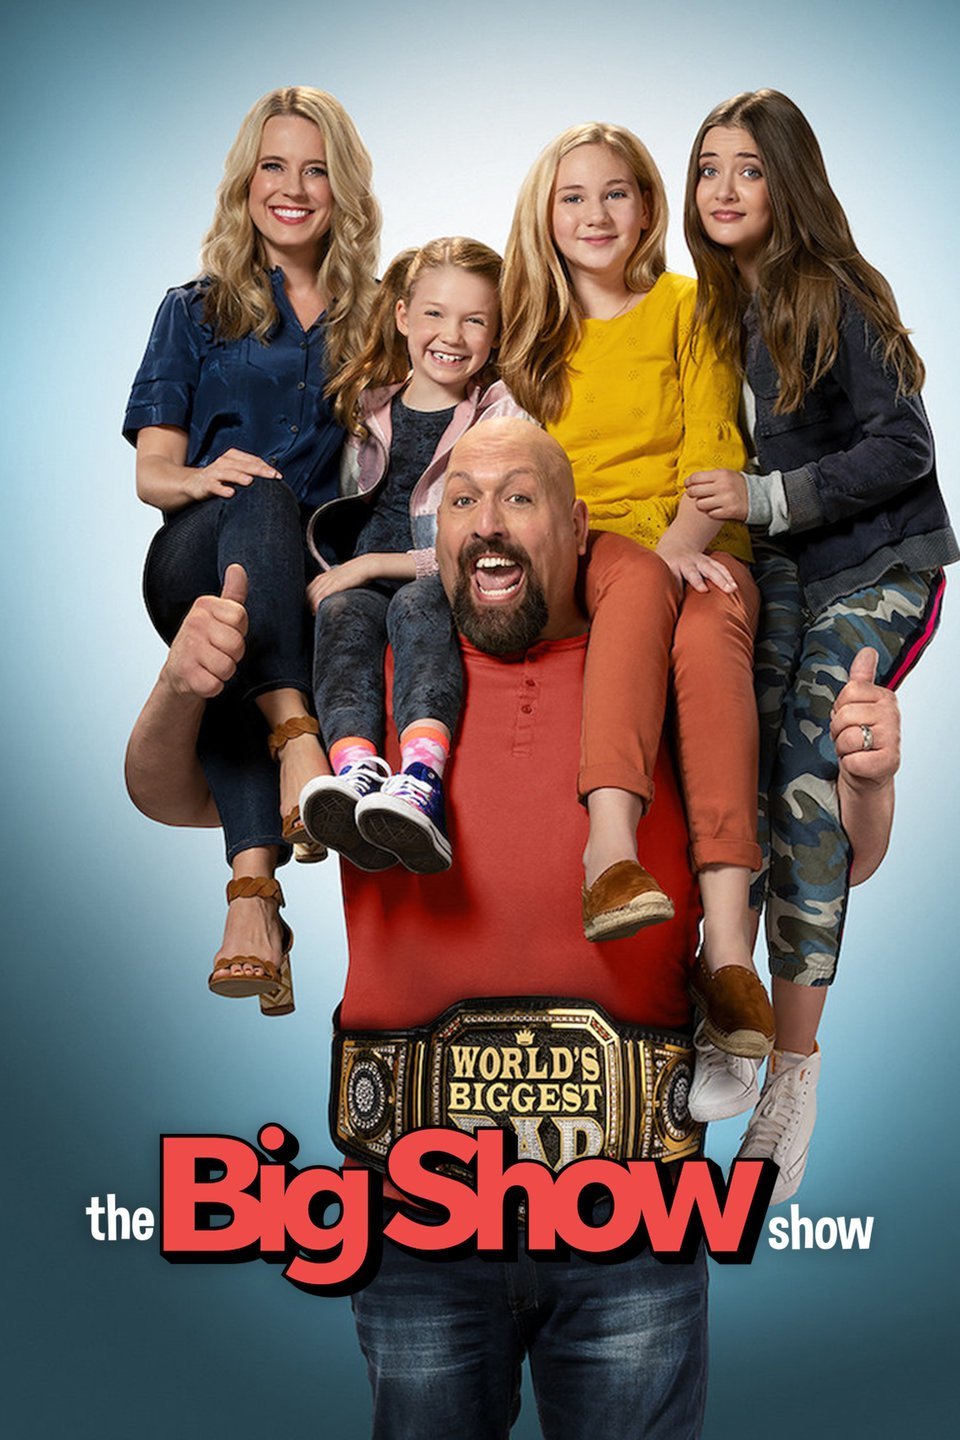 https://static.wikia.nocookie.net/netflix/images/4/45/The_Big_Show_Show_Promotional.jpg/revision/latest?cb=20200403163618